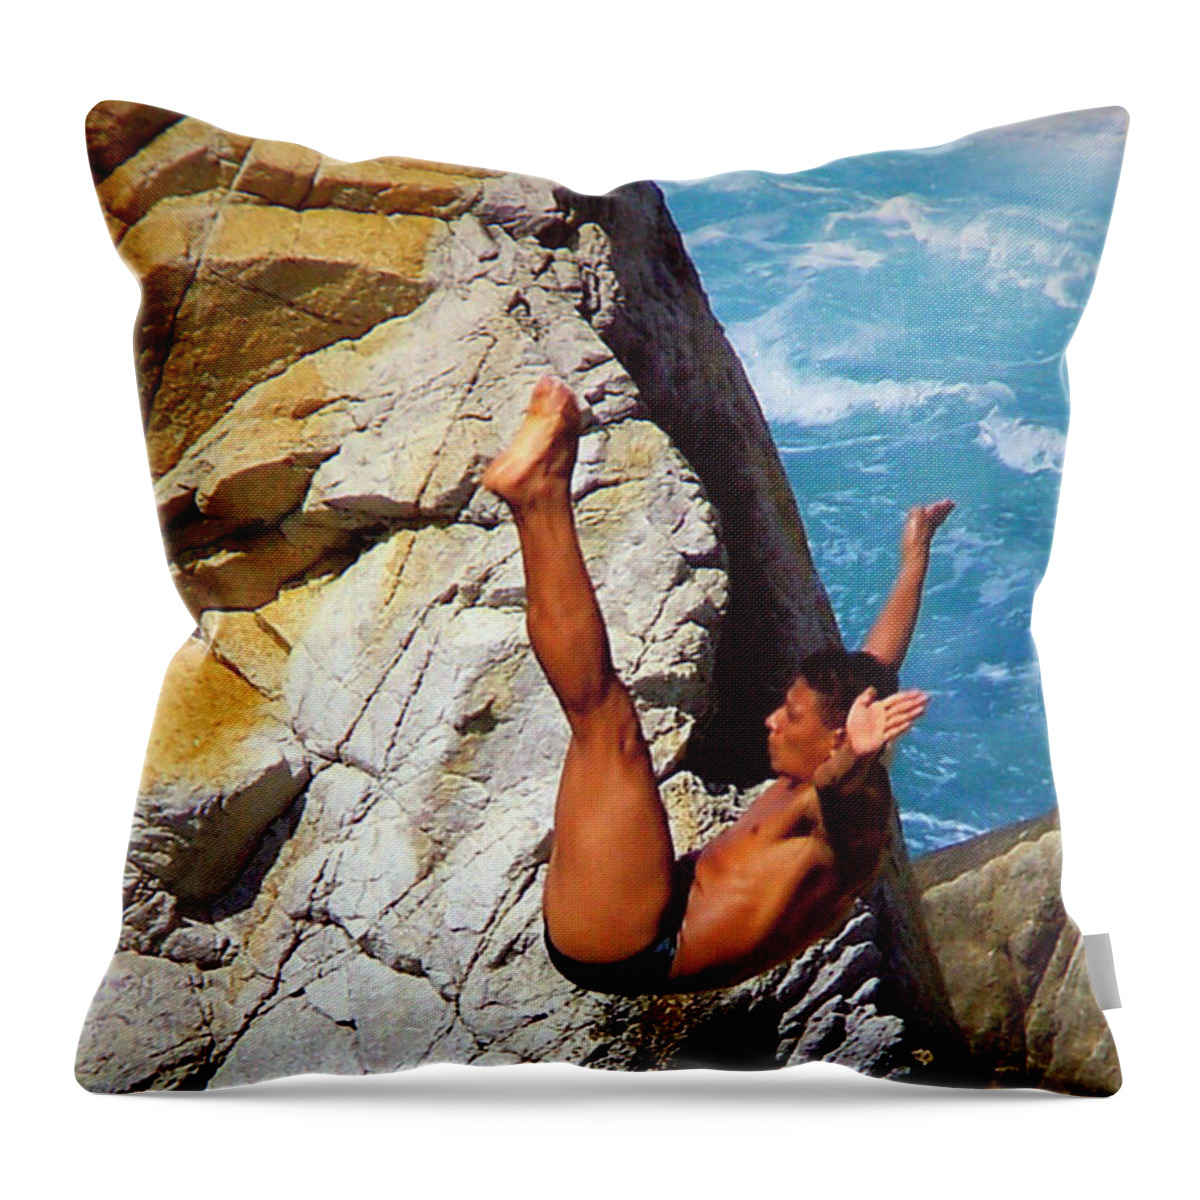 Mexico Throw Pillow featuring the photograph The Plunge  by Karen Wiles